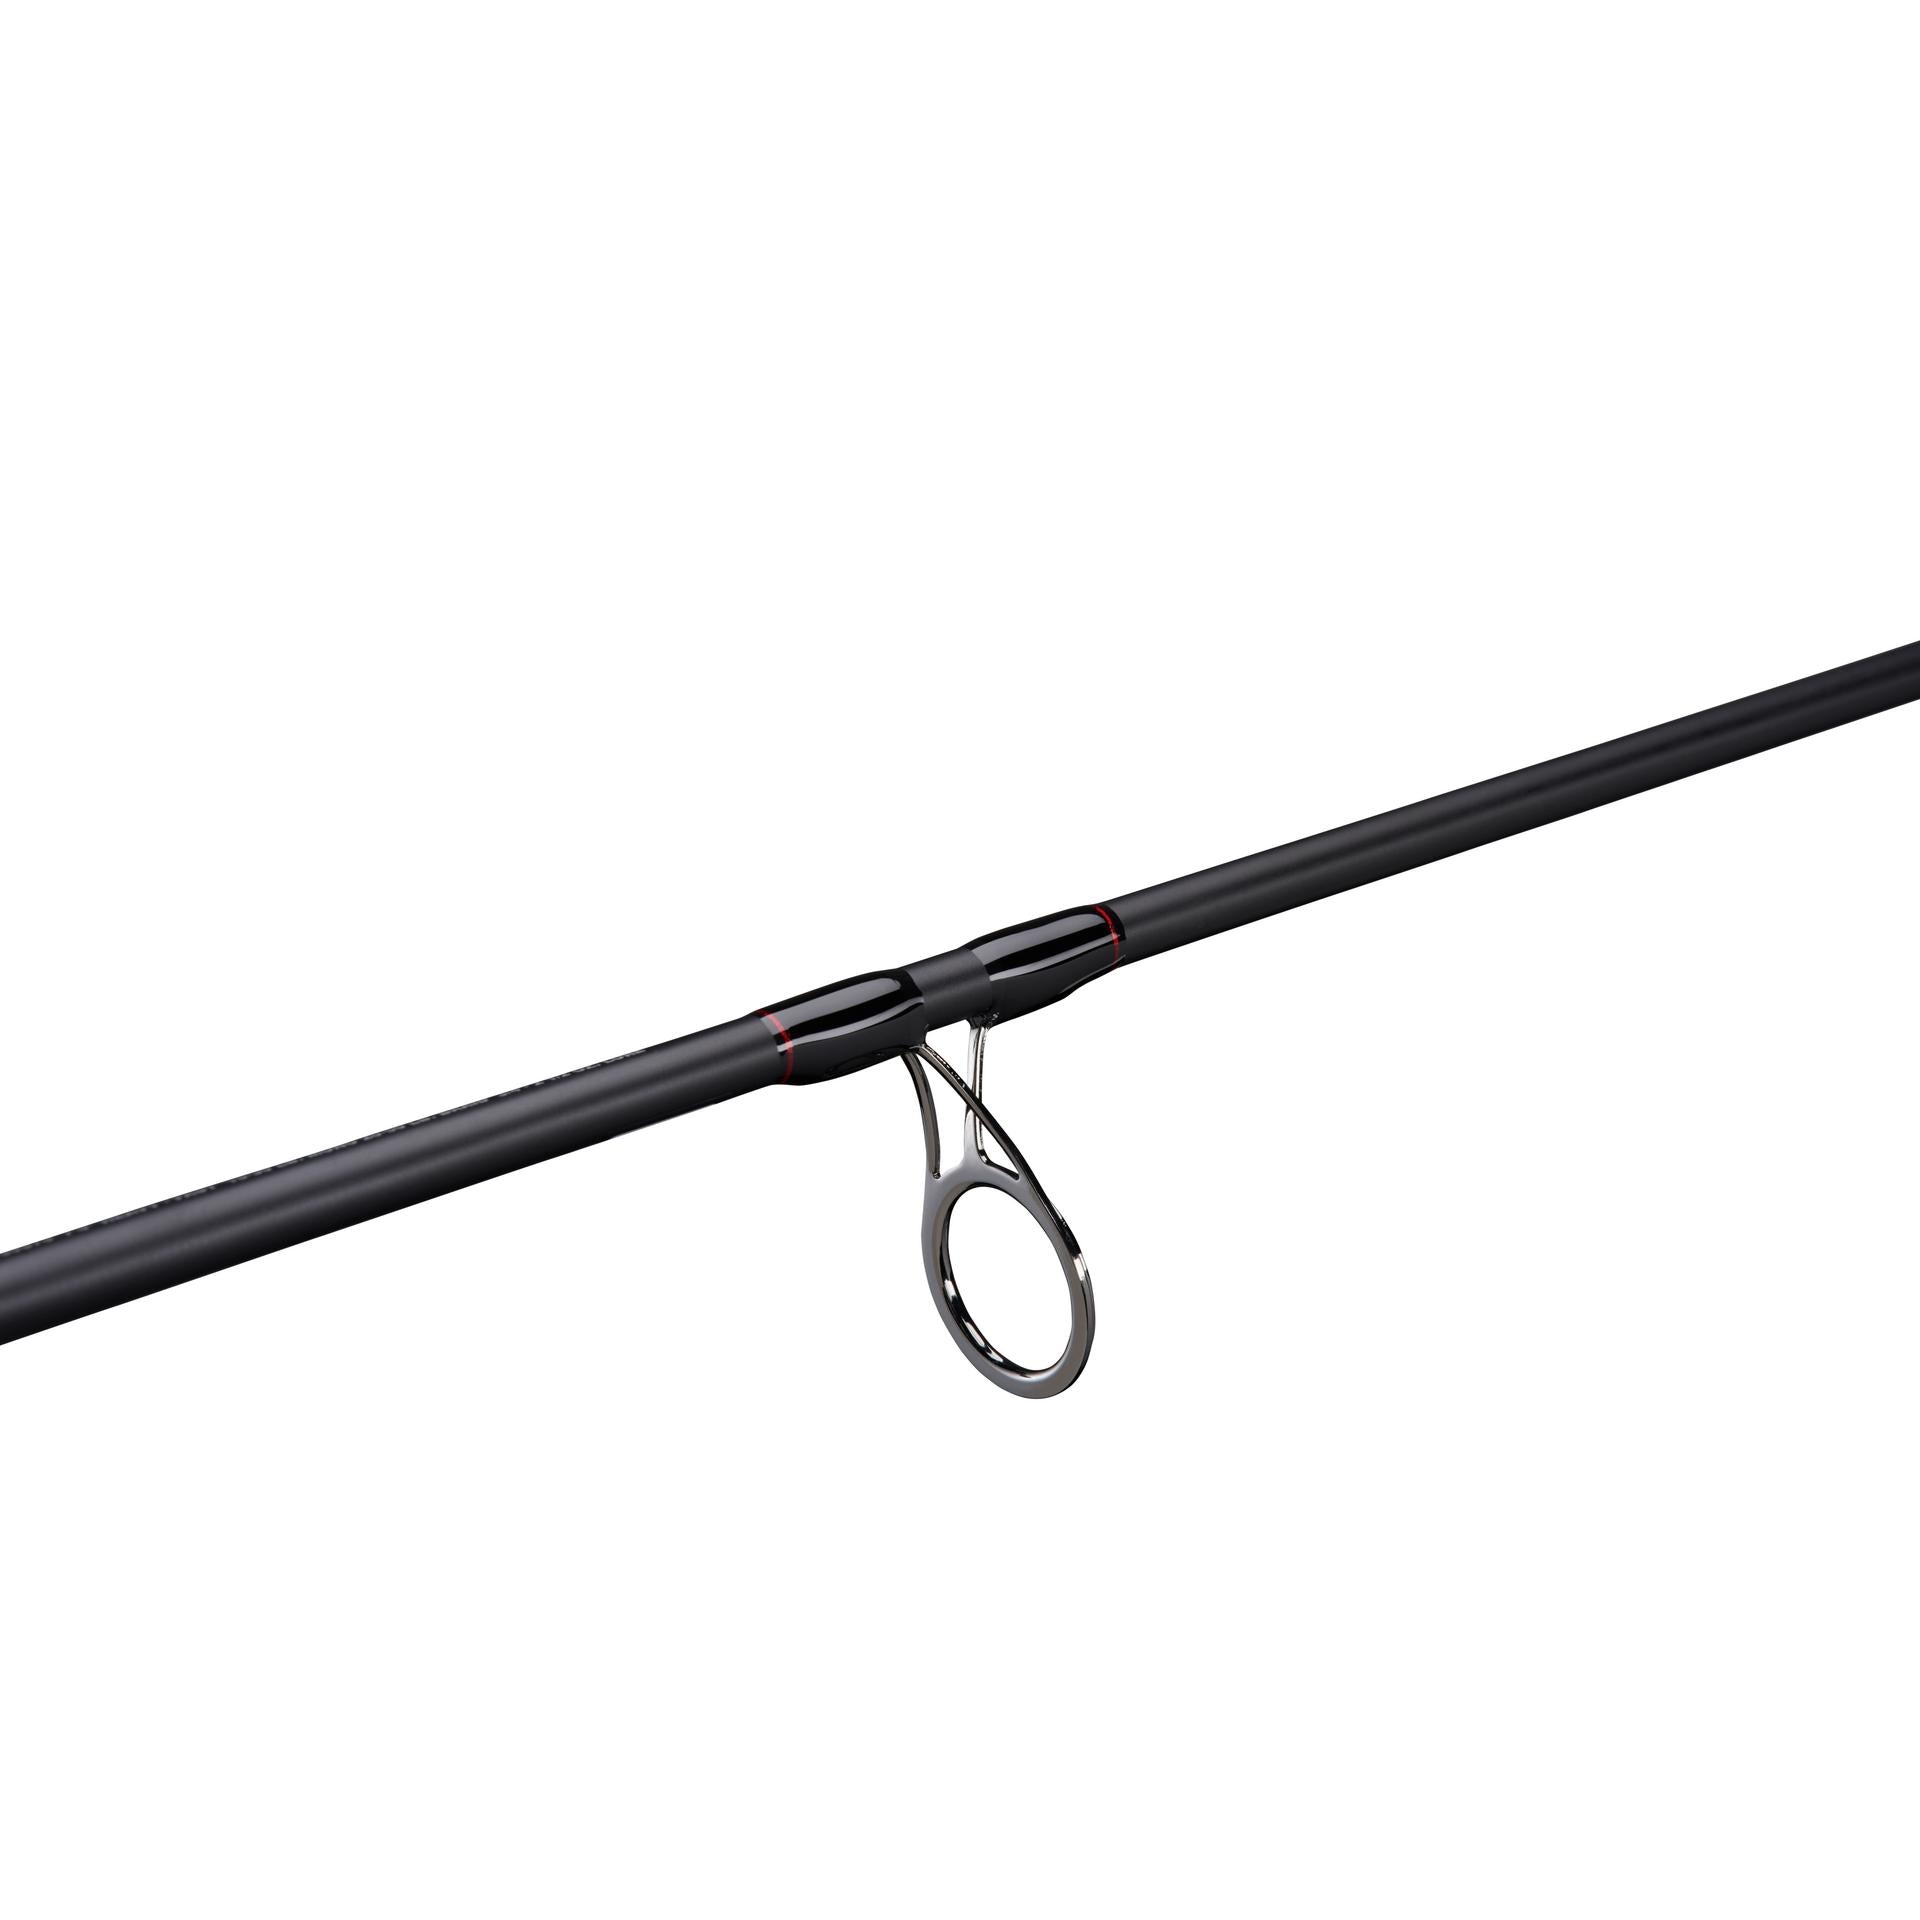 Prevail® II Inshore Spinning Rod